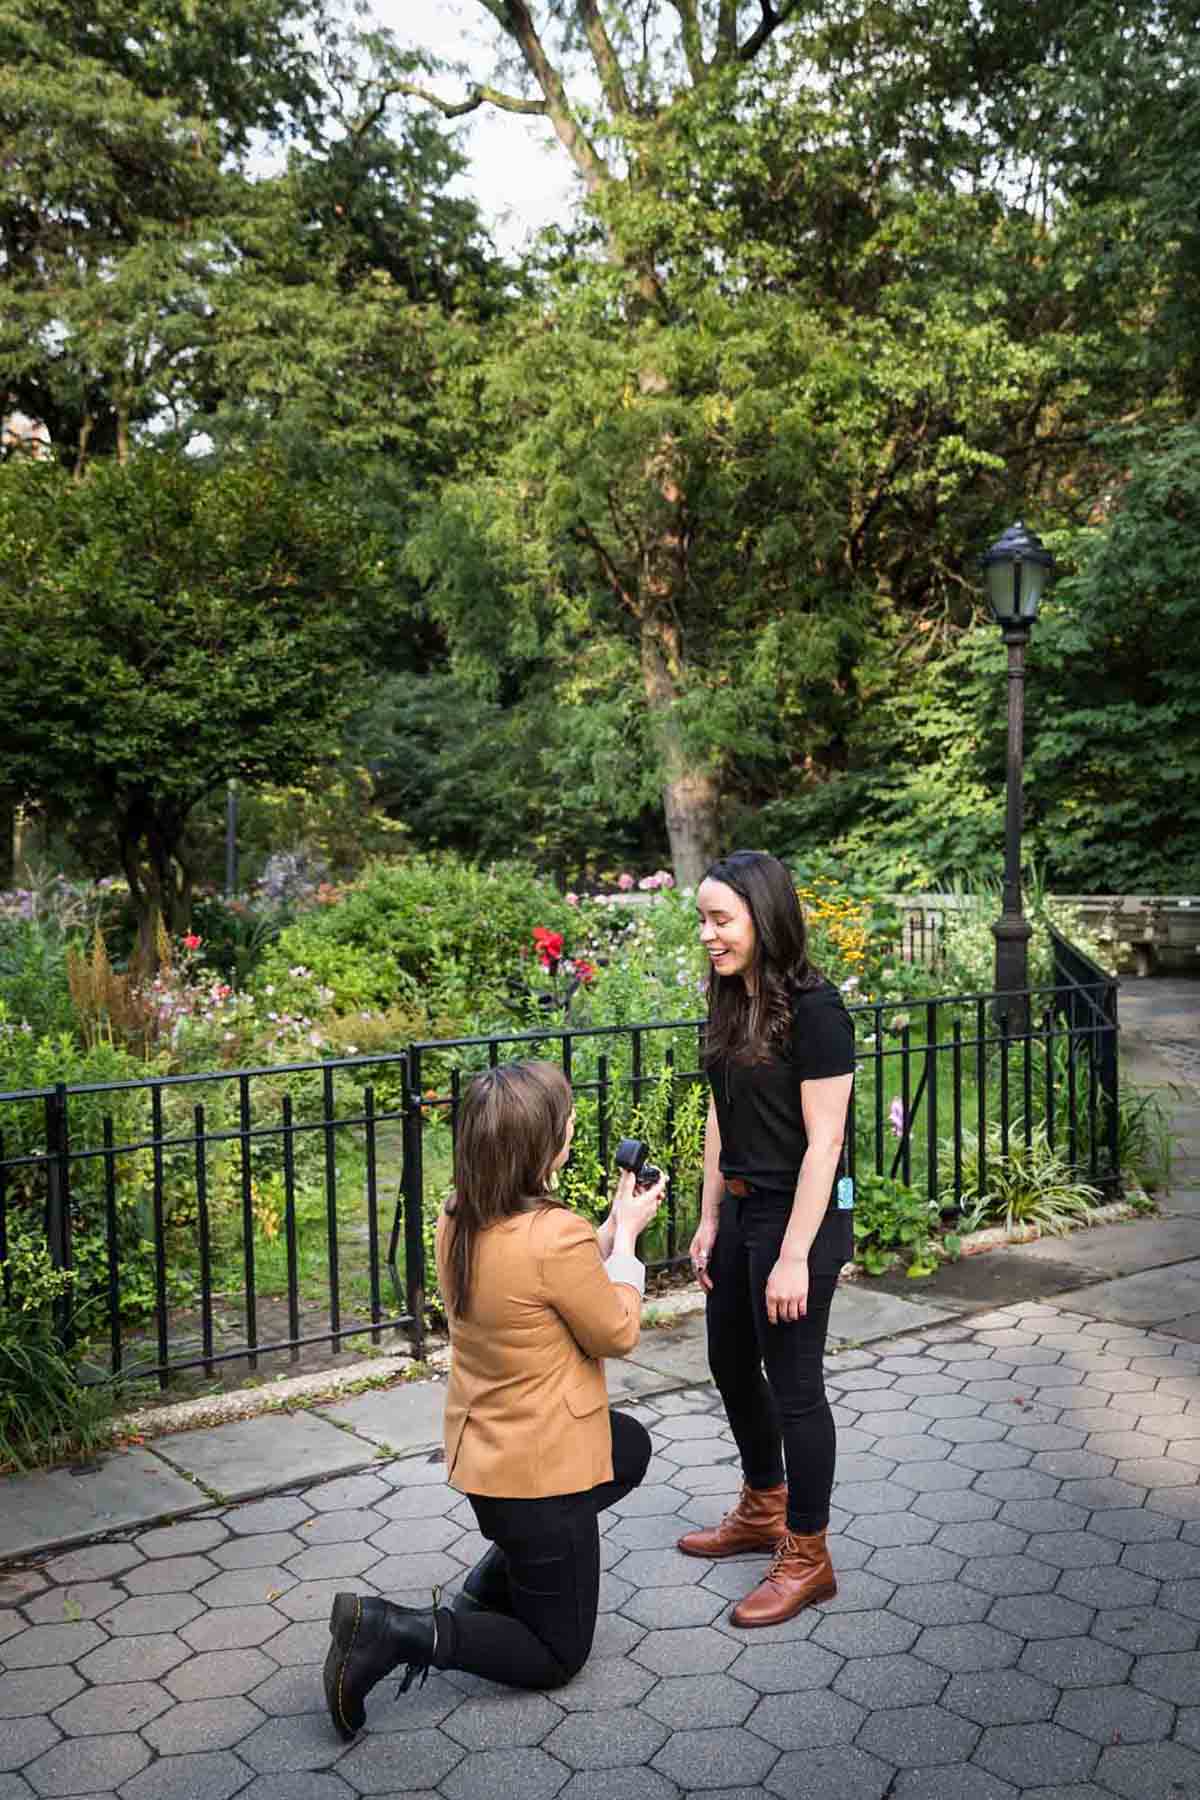 Woman on one knee showing engagement ring to another woman during Riverside Park surprise proposal